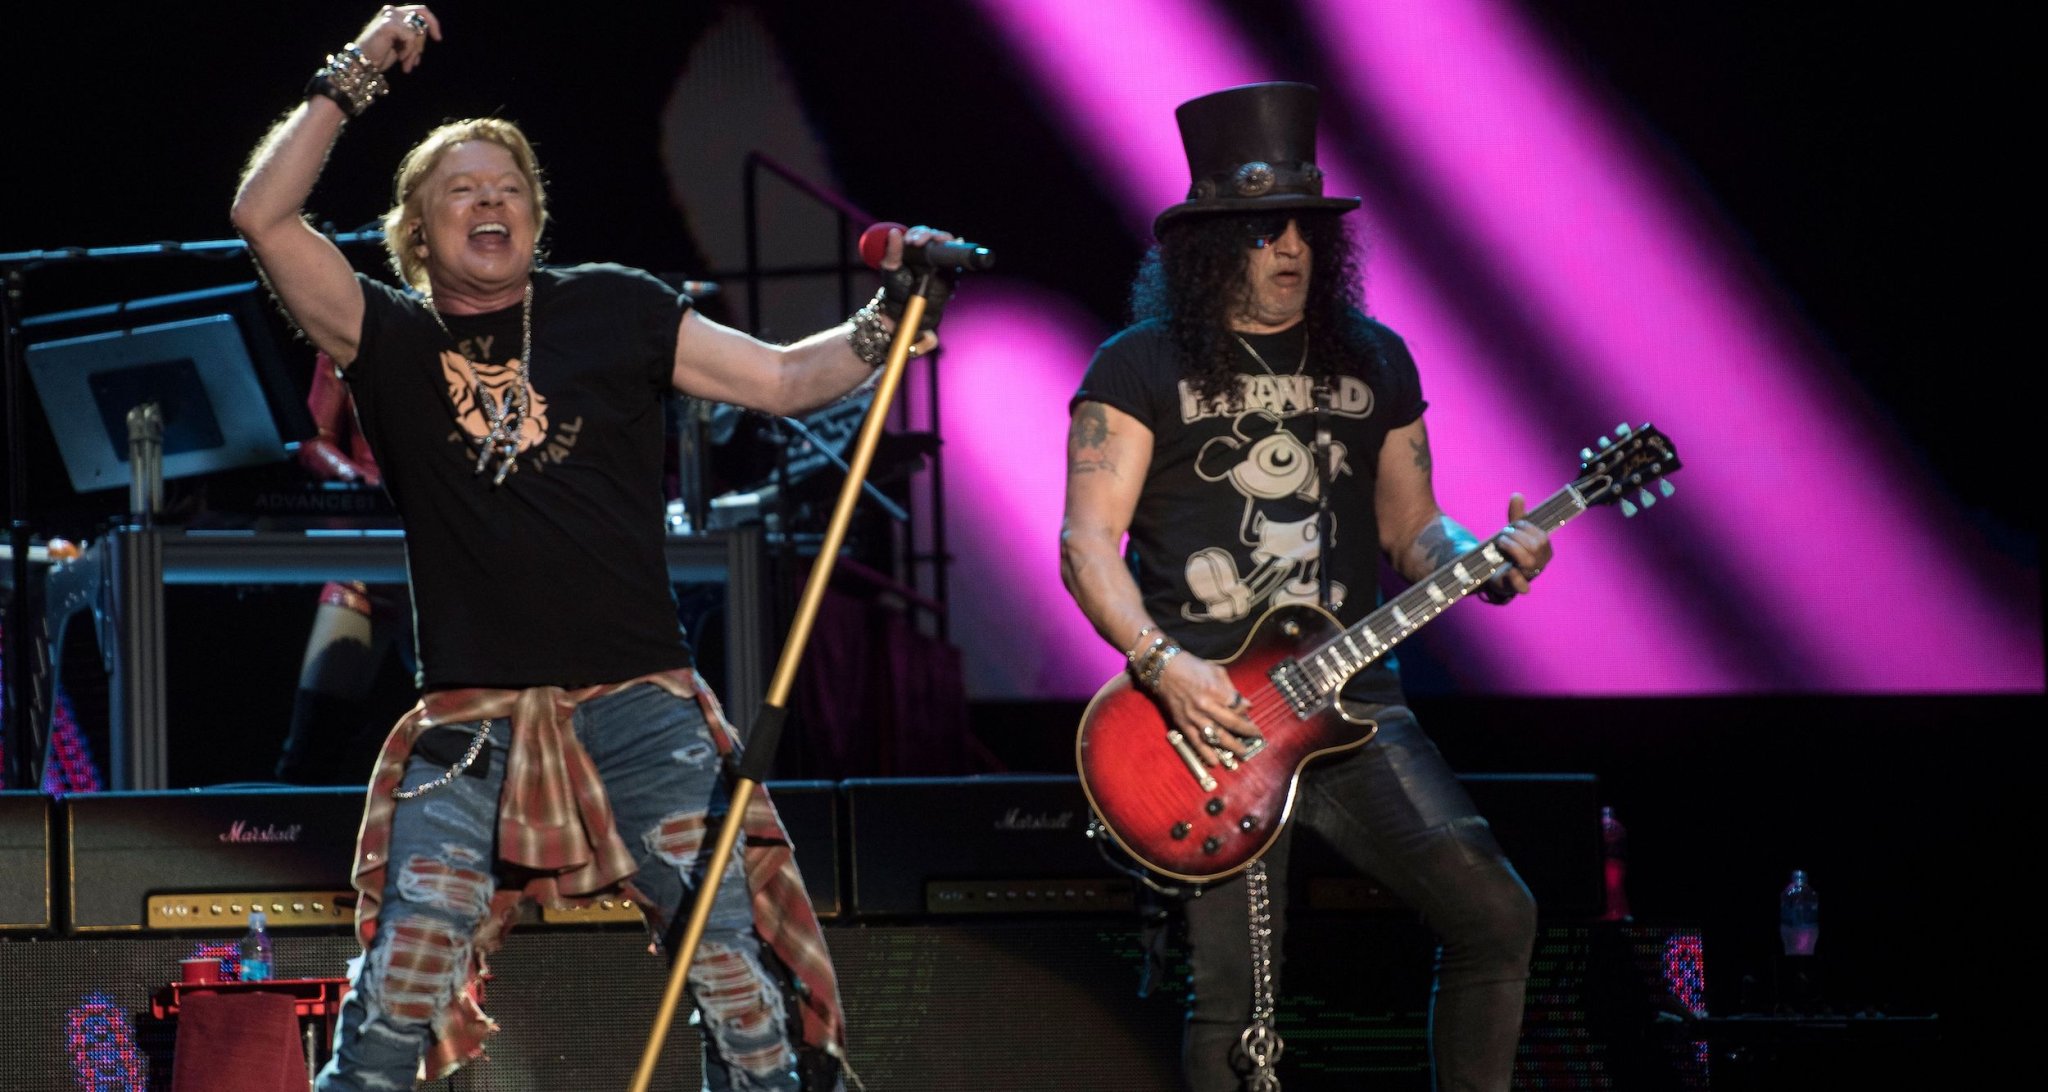 Guns N' Roses Play Songs Live For First Time in 30 Years: Watch